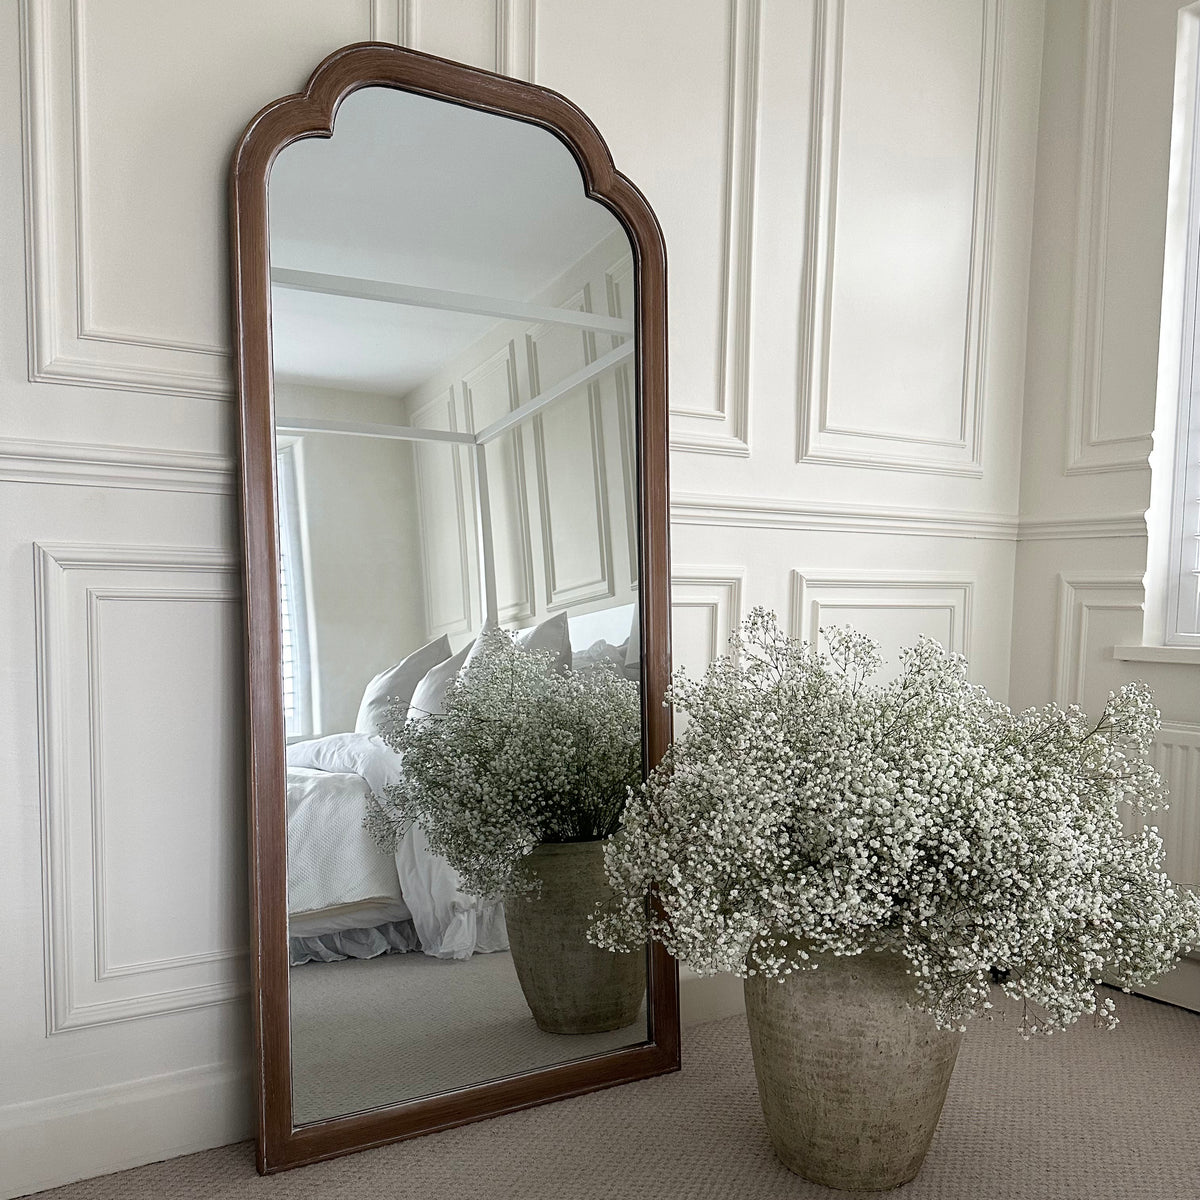 Full Length Washed Wood Arched Mirror leaning against wall